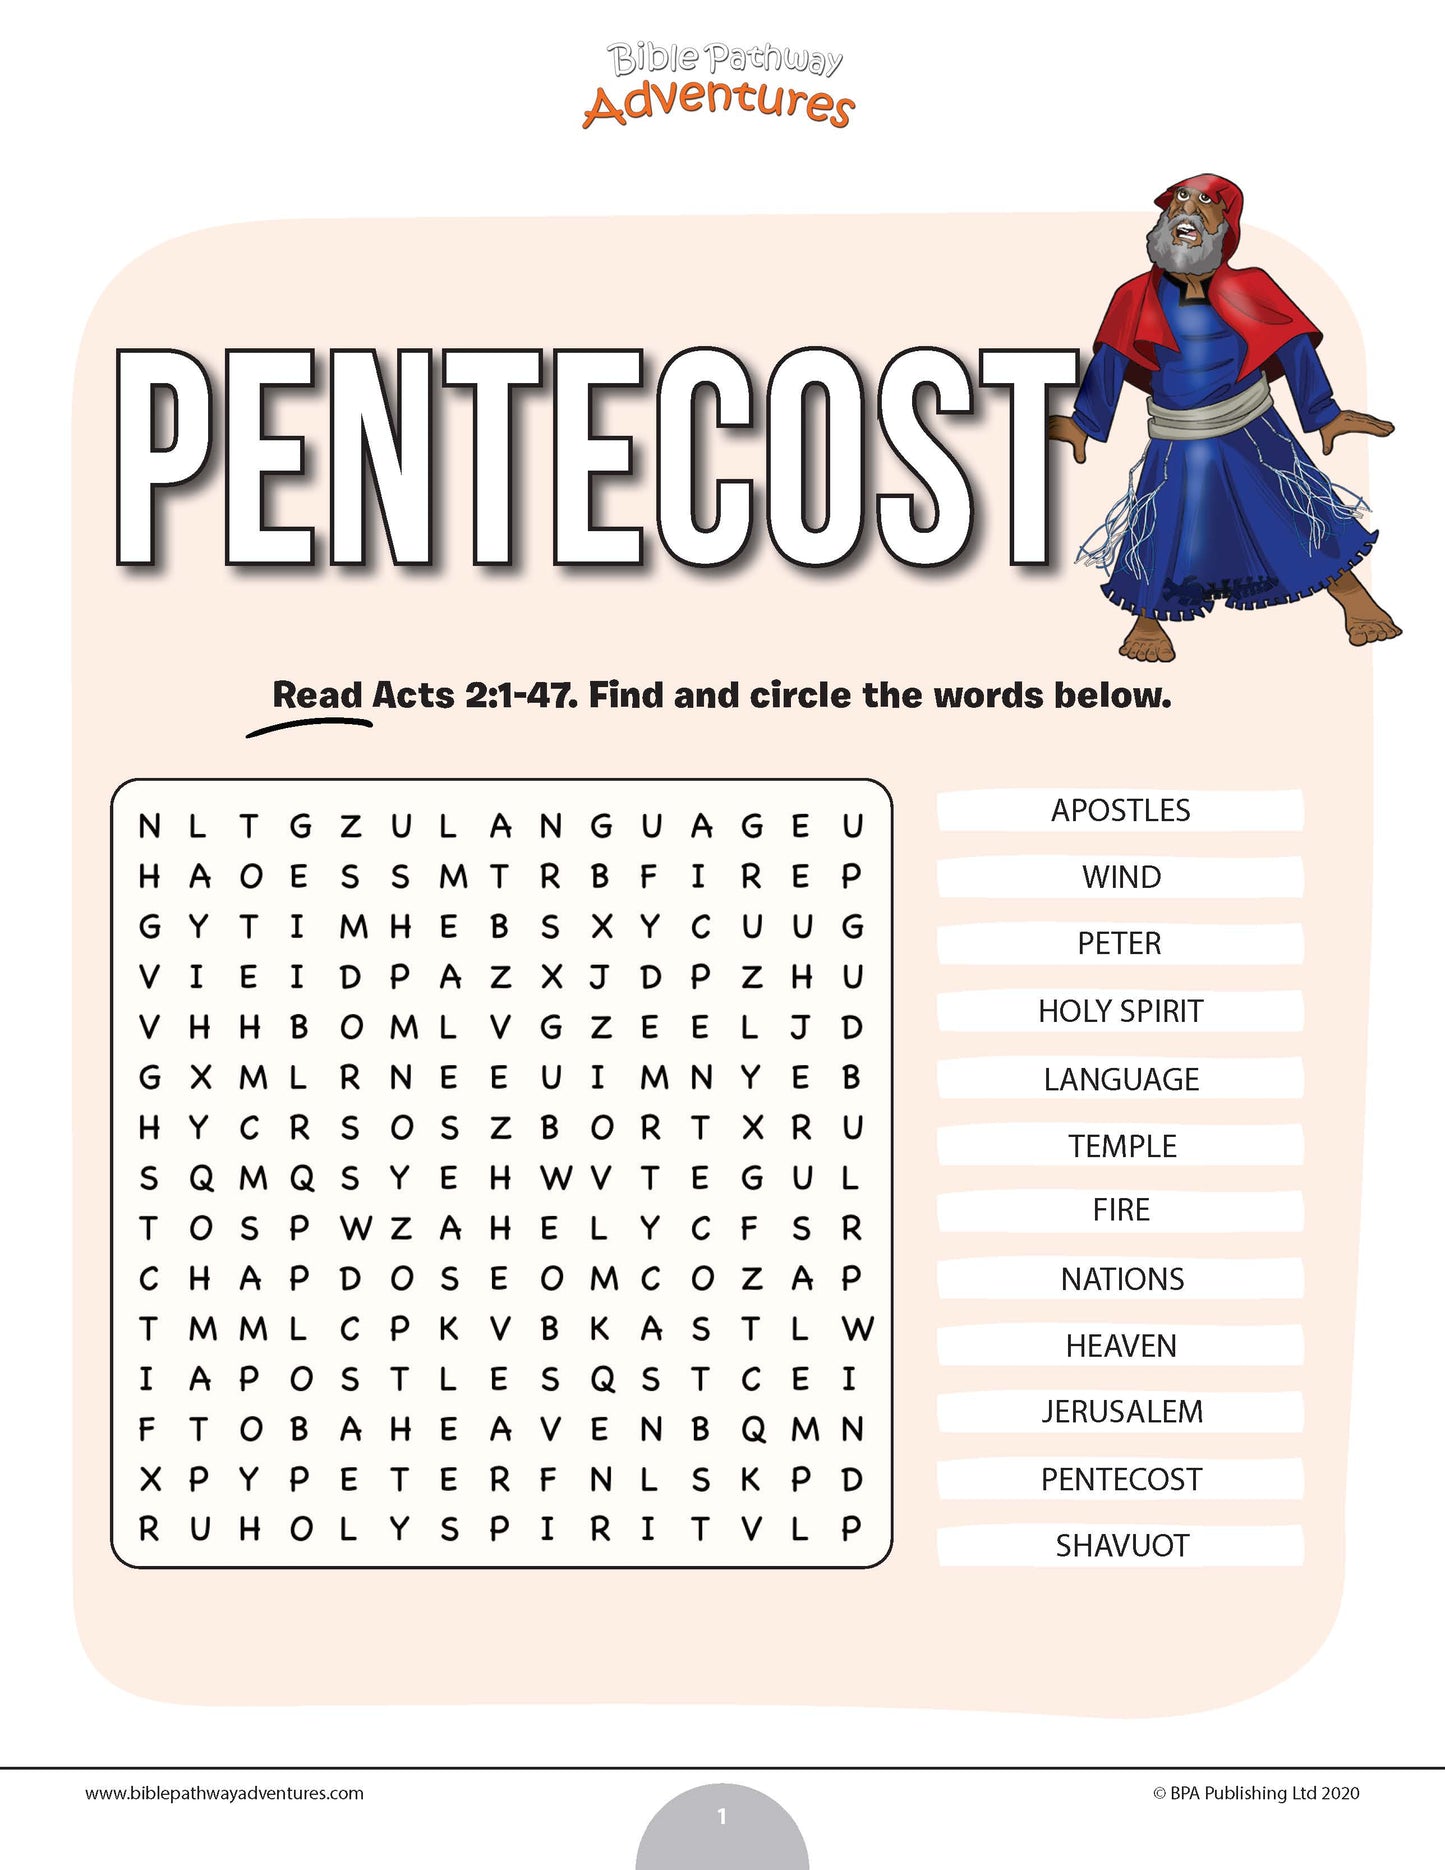 Pentecost word search